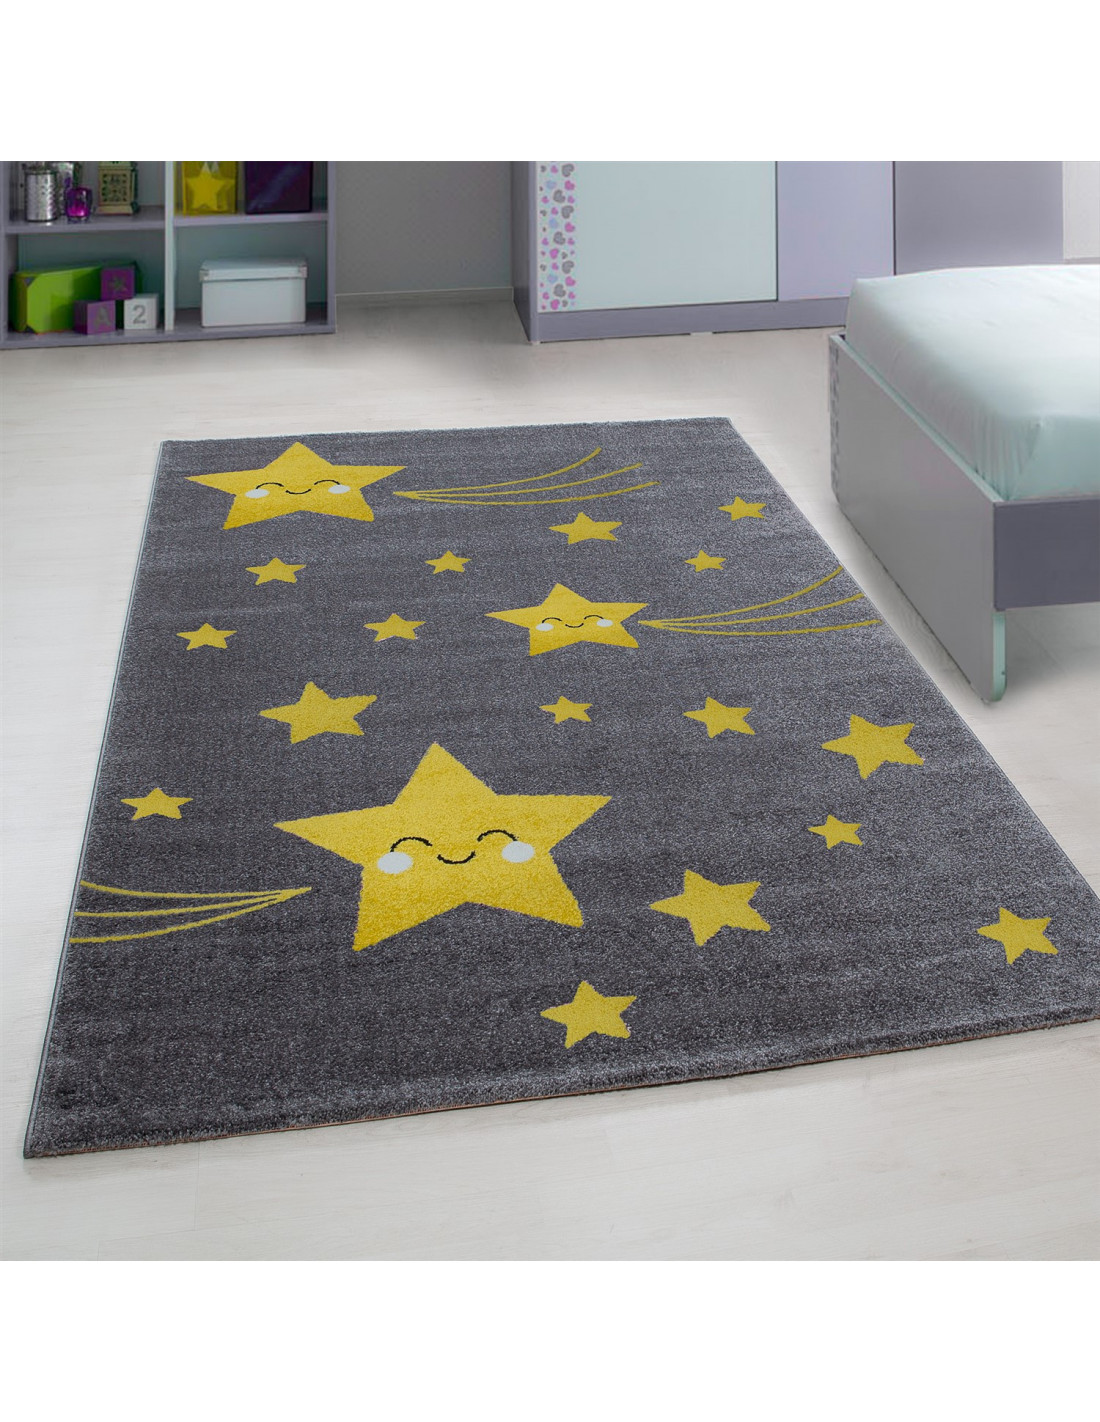 Children's room rug with star yellow motifs